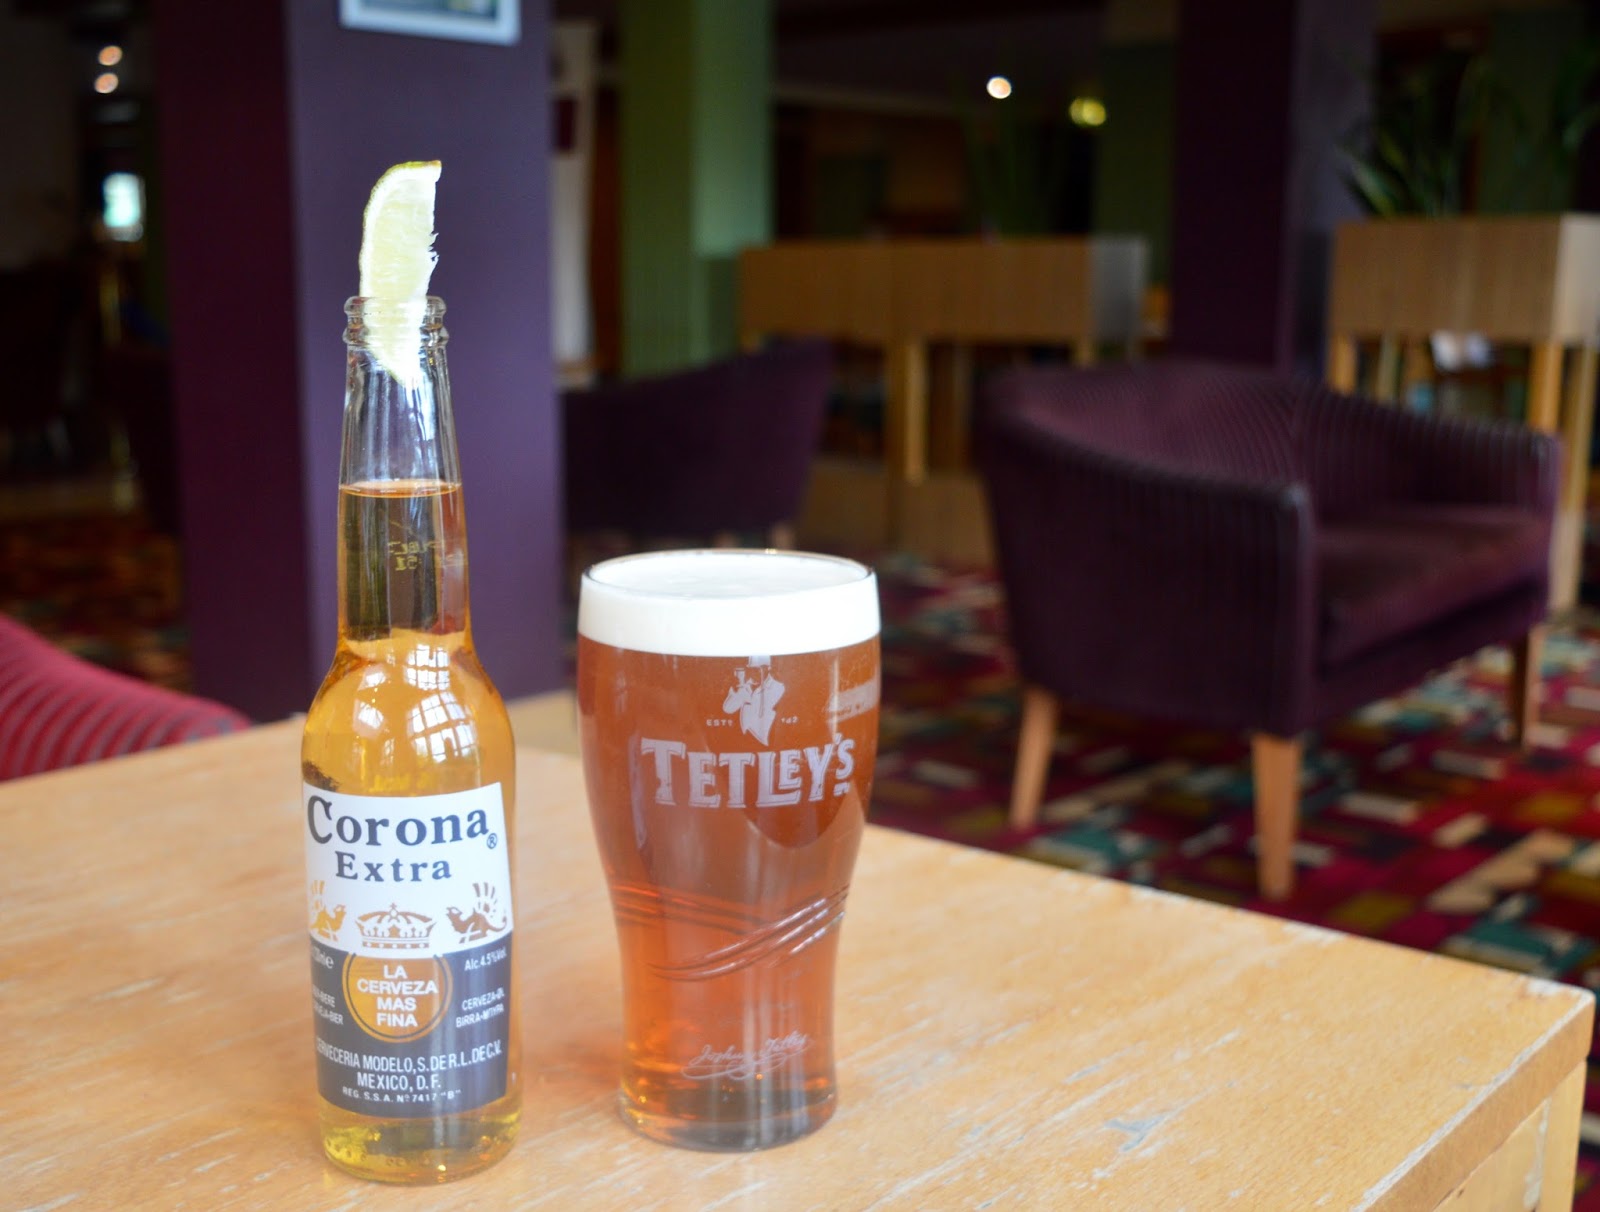 Book Cheap Airport Parking & Hotels with Skyparksecure | Airport Inn Manchester Review - corona from hotel bar